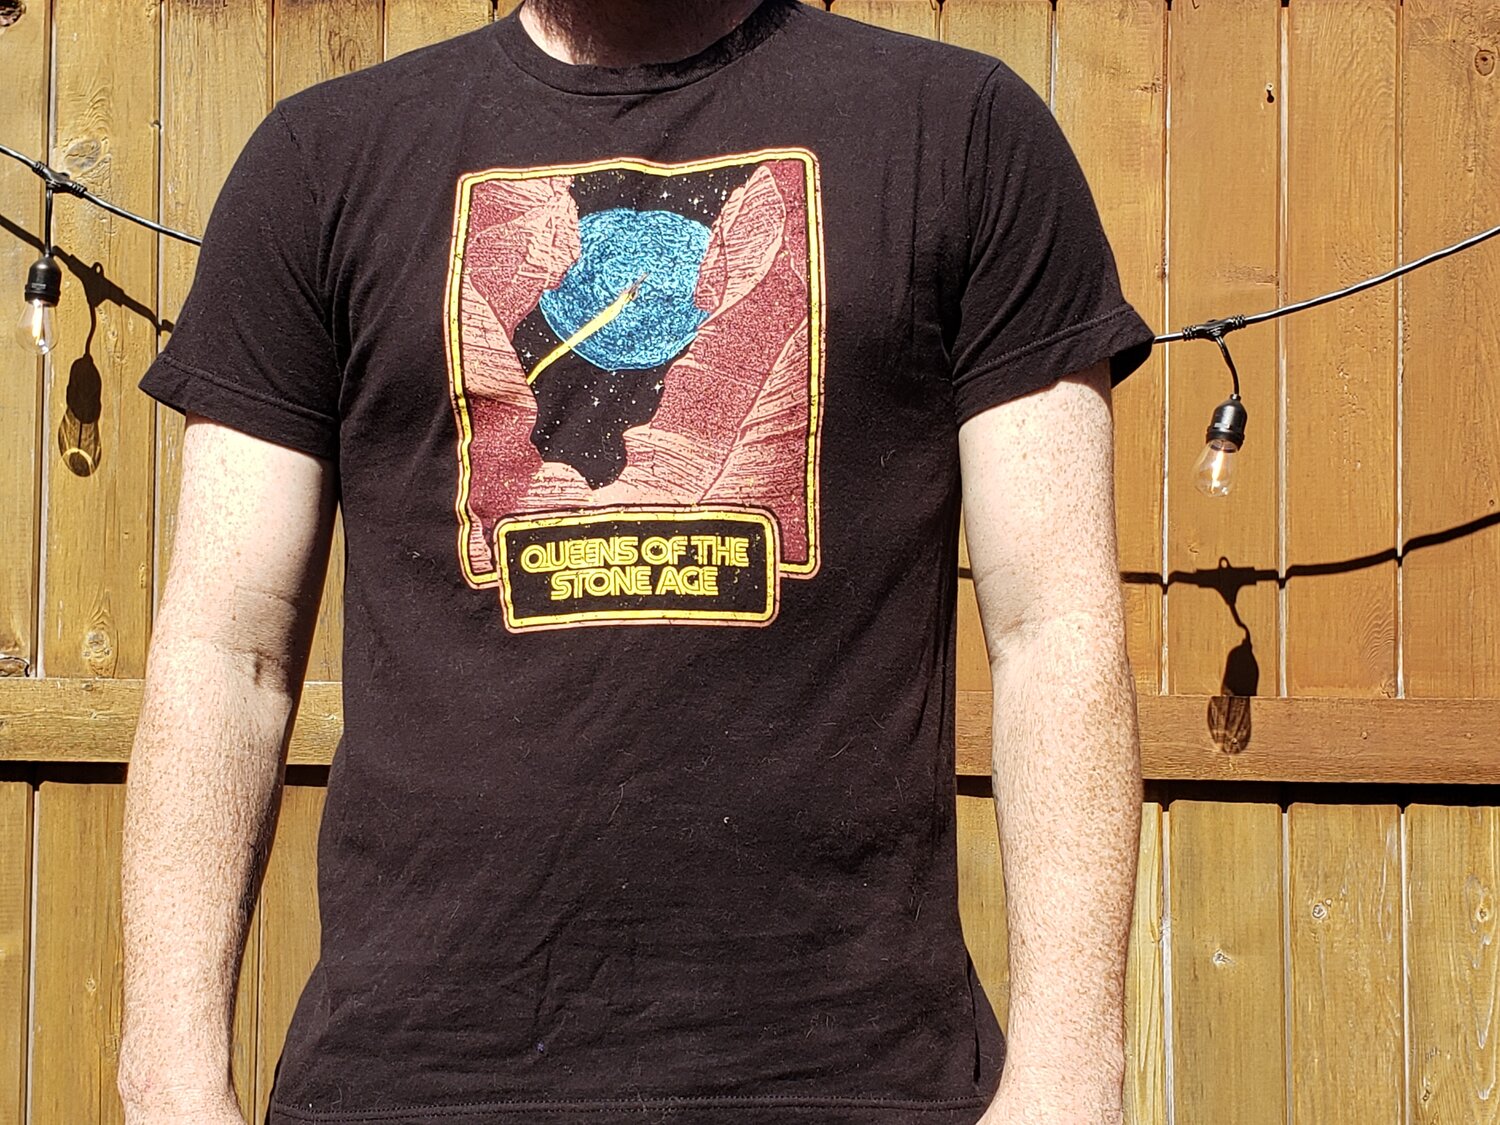 Queens Of The Stone Age 'Canyon' T-Shirt NEW & OFFICIAL!